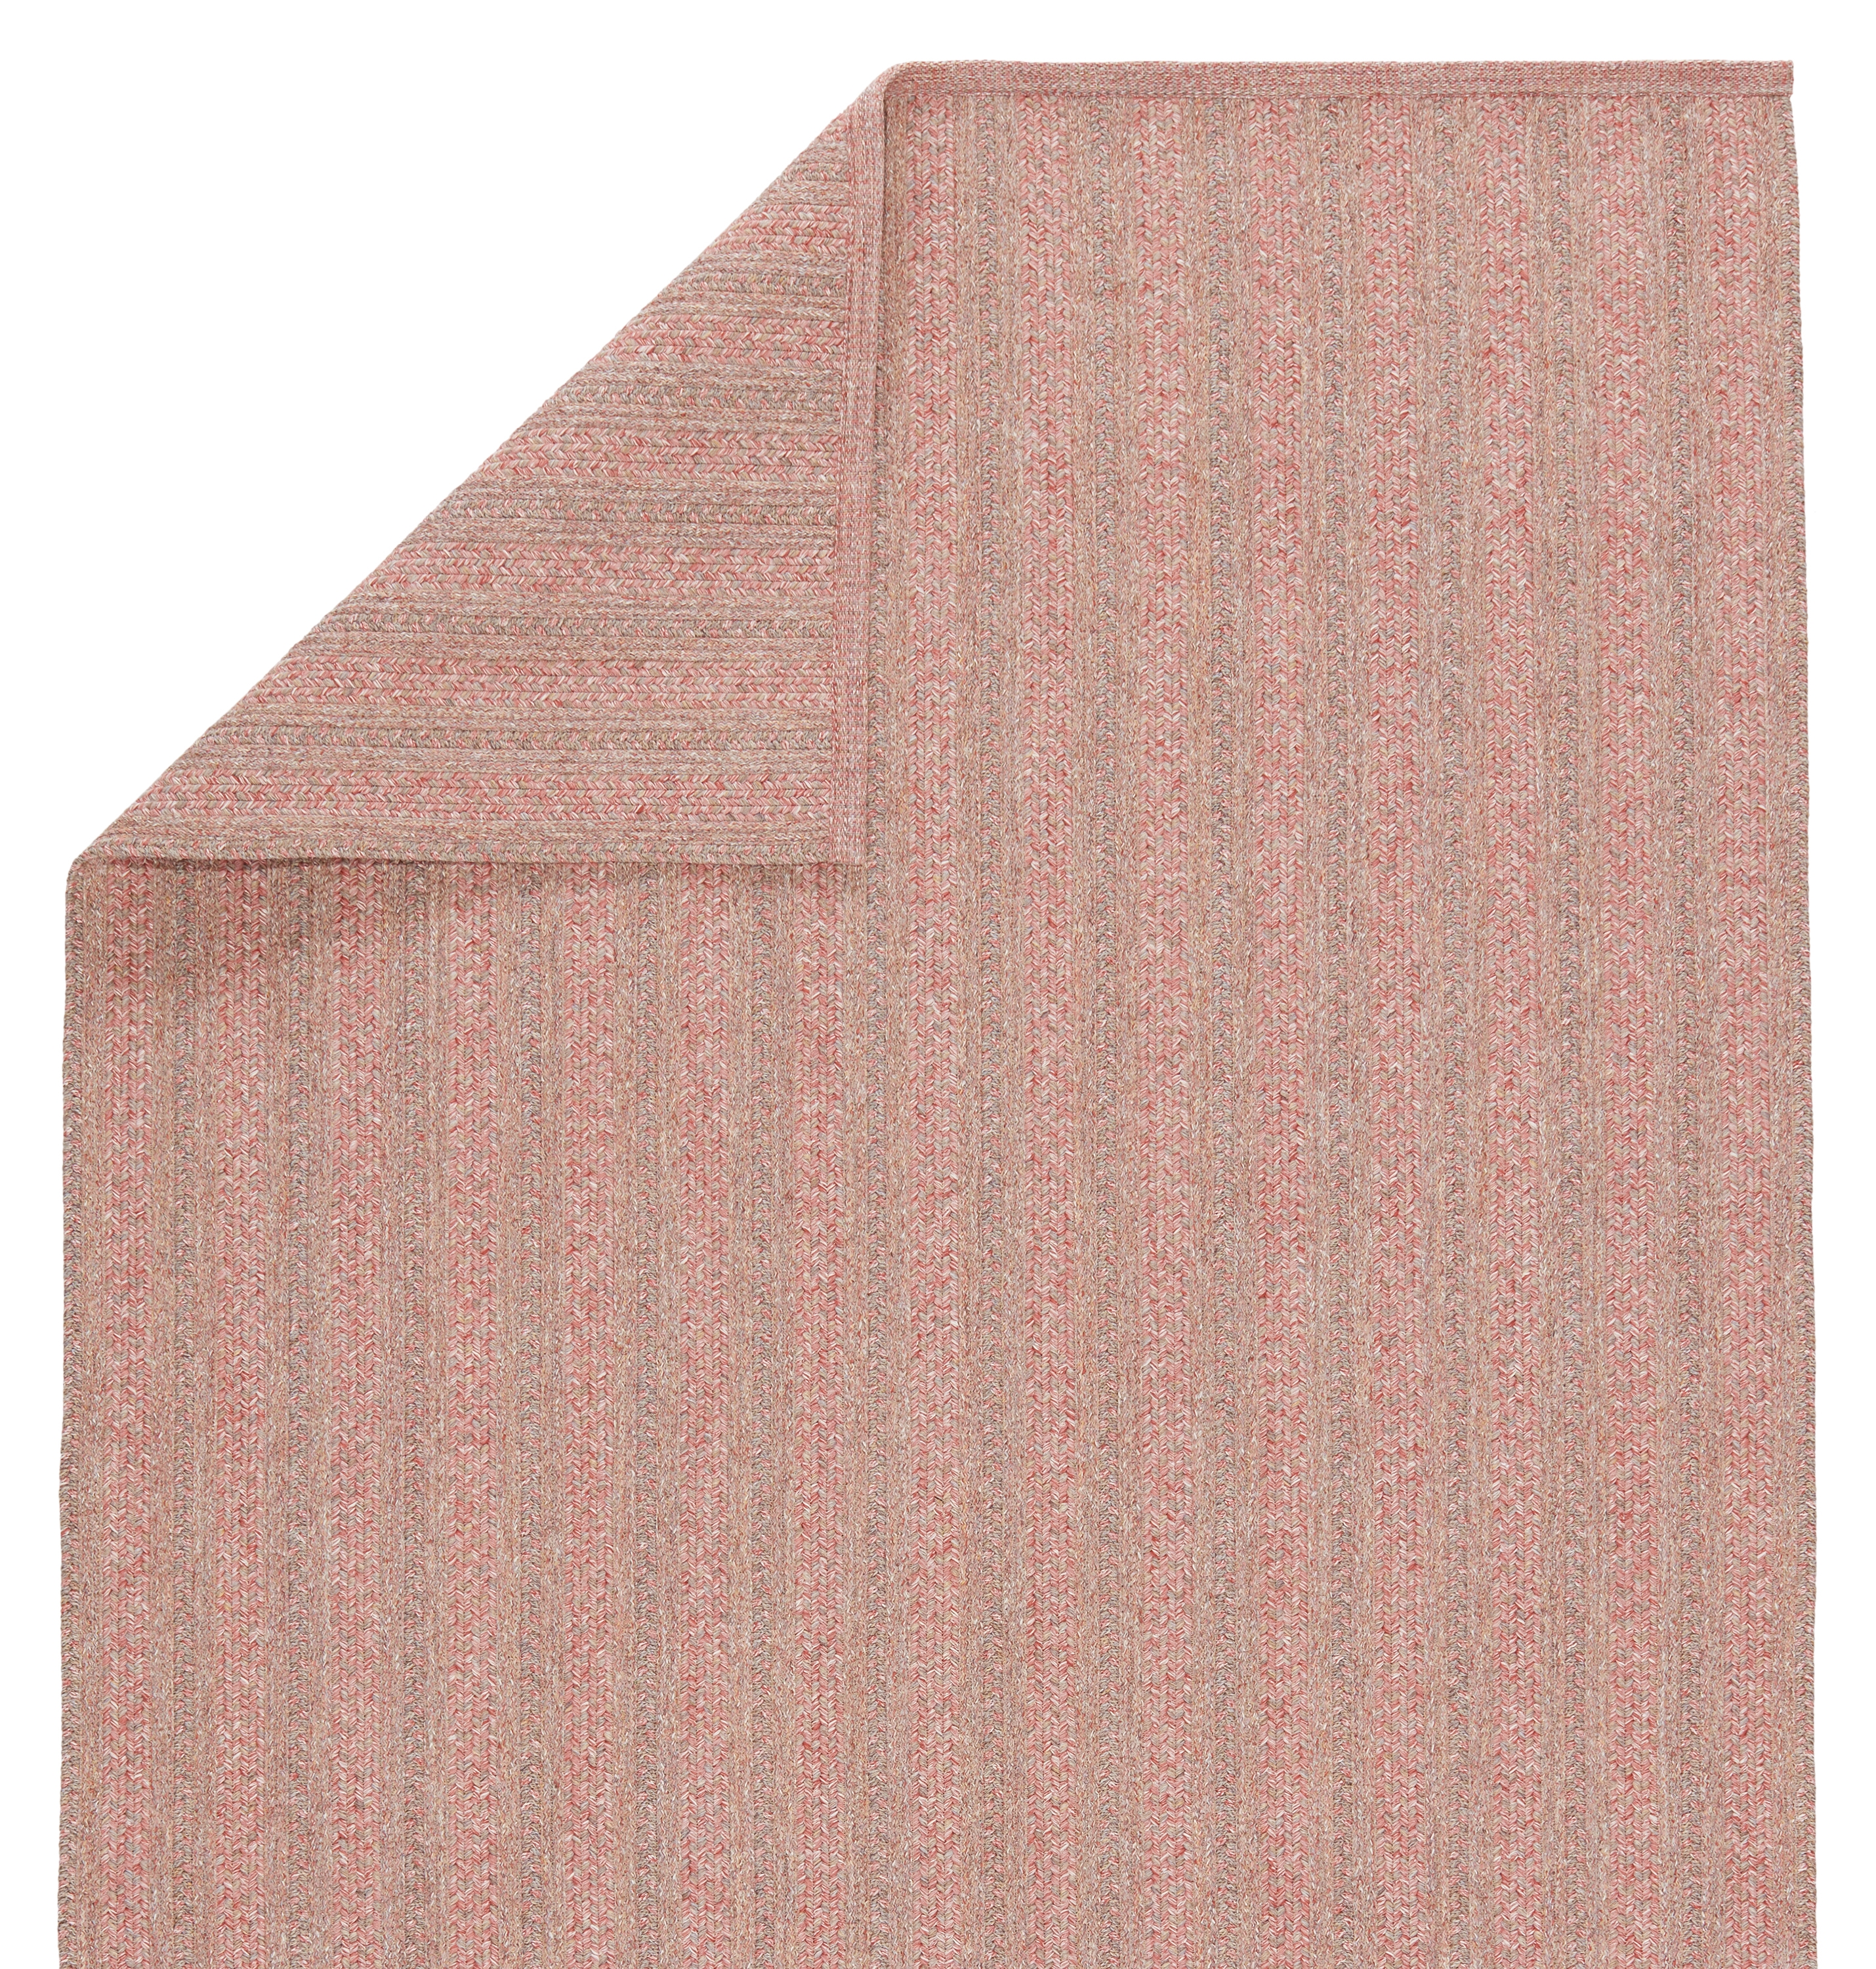 Topsail Indoor/ Outdoor Striped Rose/ Taupe Area Rug (4'X6') - Image 2